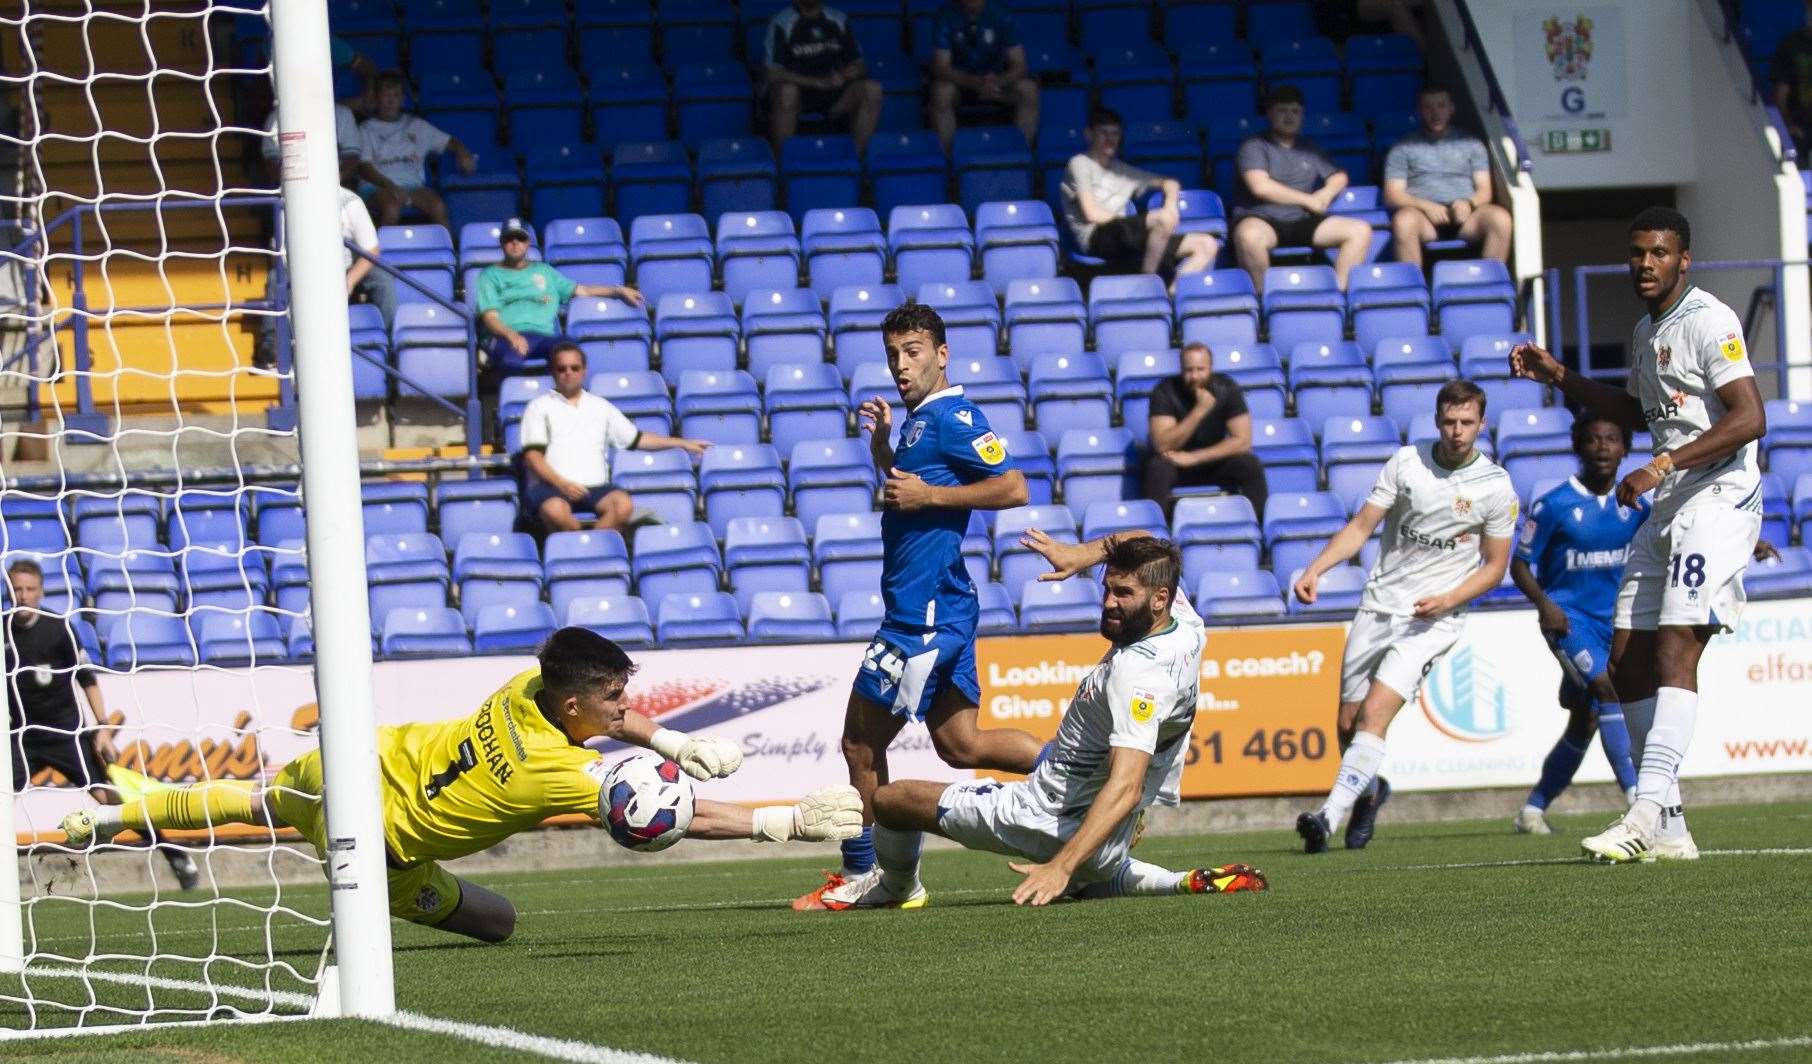 Gillingham go close during the second half at Tranmere. Picture: KPI